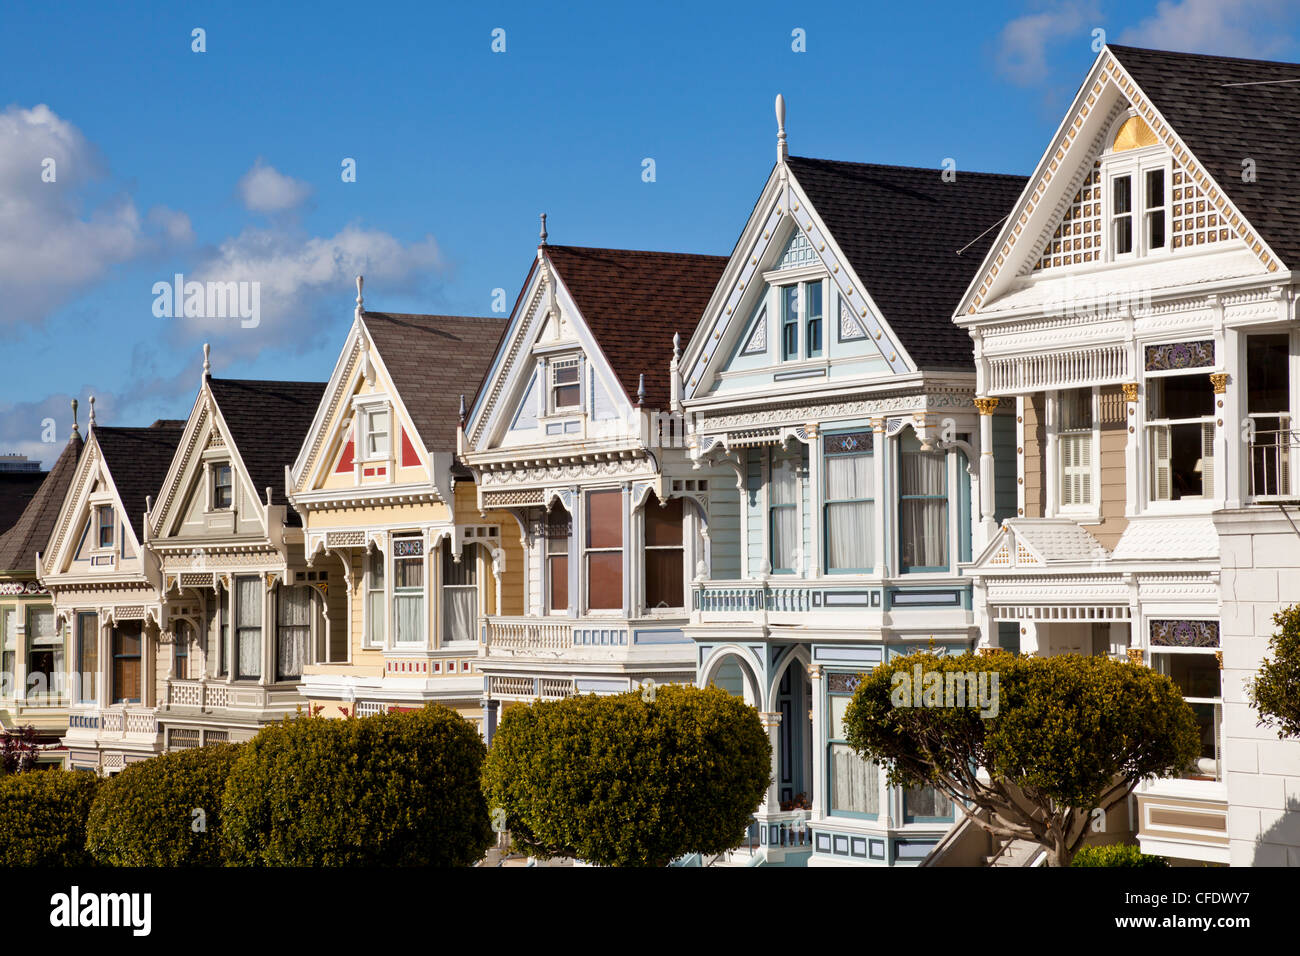 The famous Painted Ladies, well maintained old Victorian houses on Alamo Square, San Francisco, California, USA Stock Photo